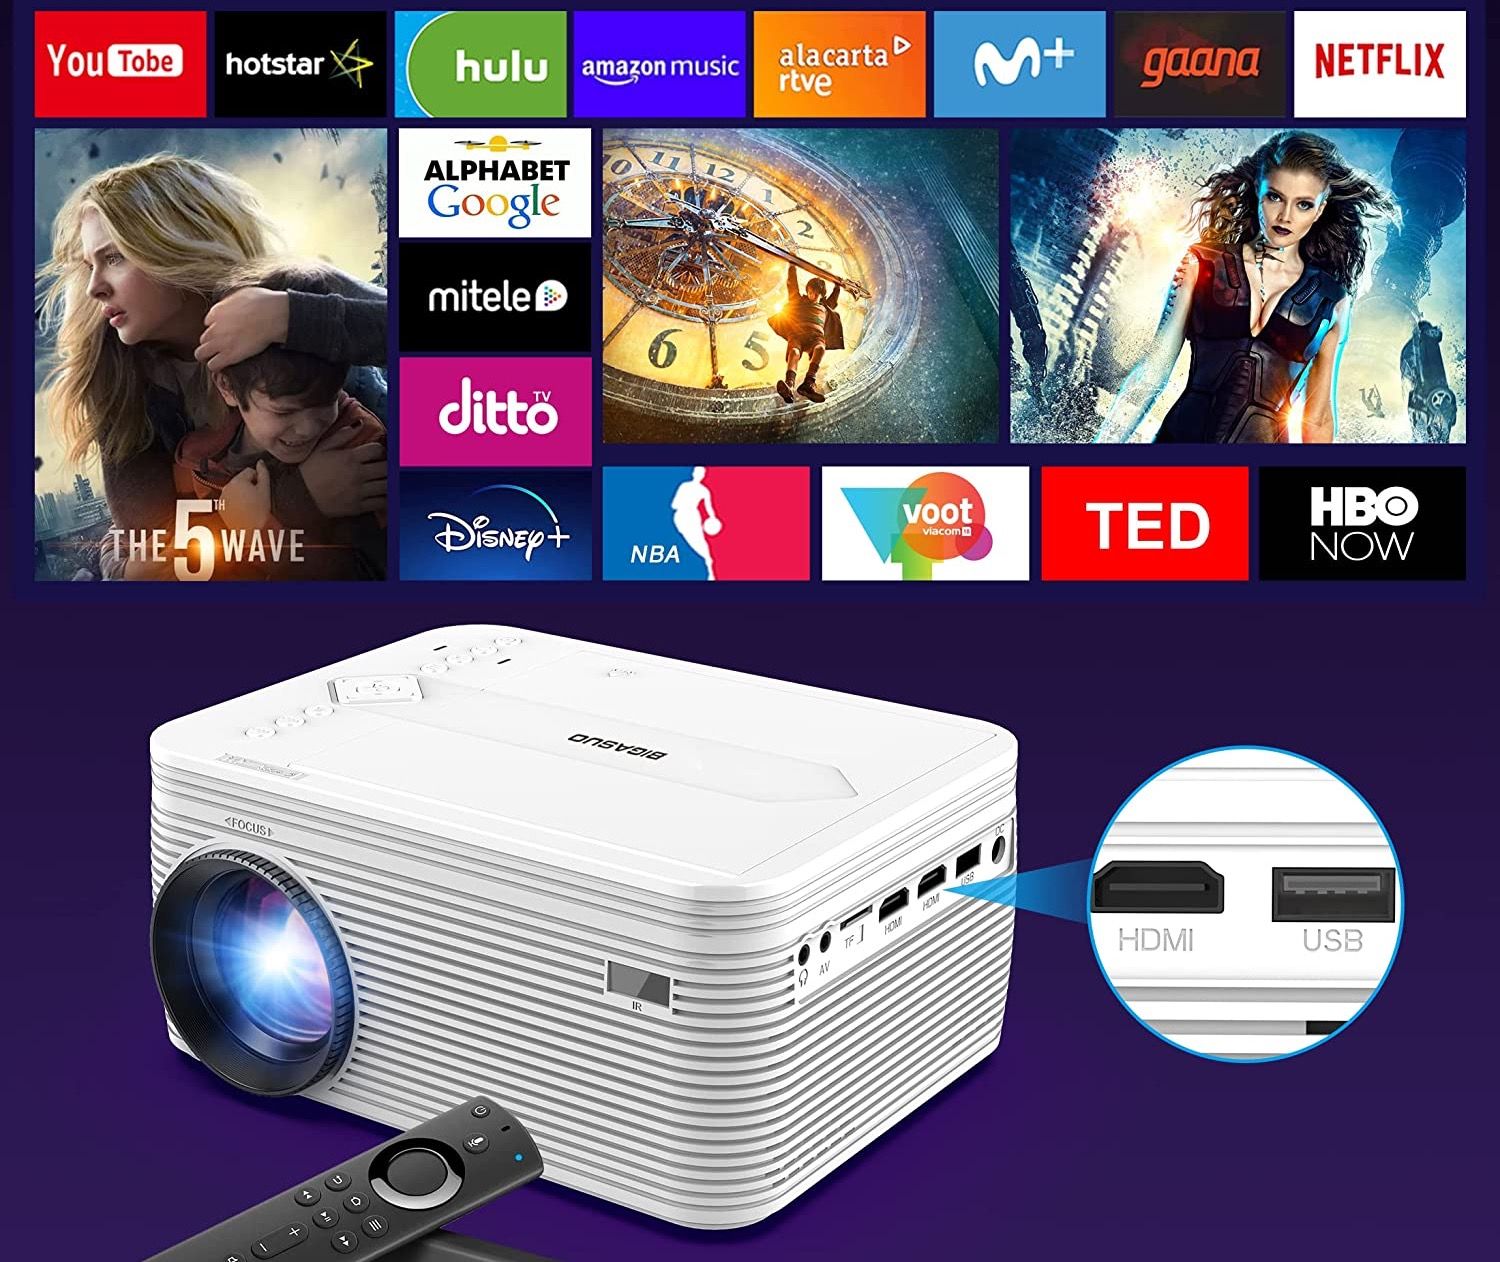 BIGASUO Pro302 projector showing ports and displaying compatible entertainment networks in the background